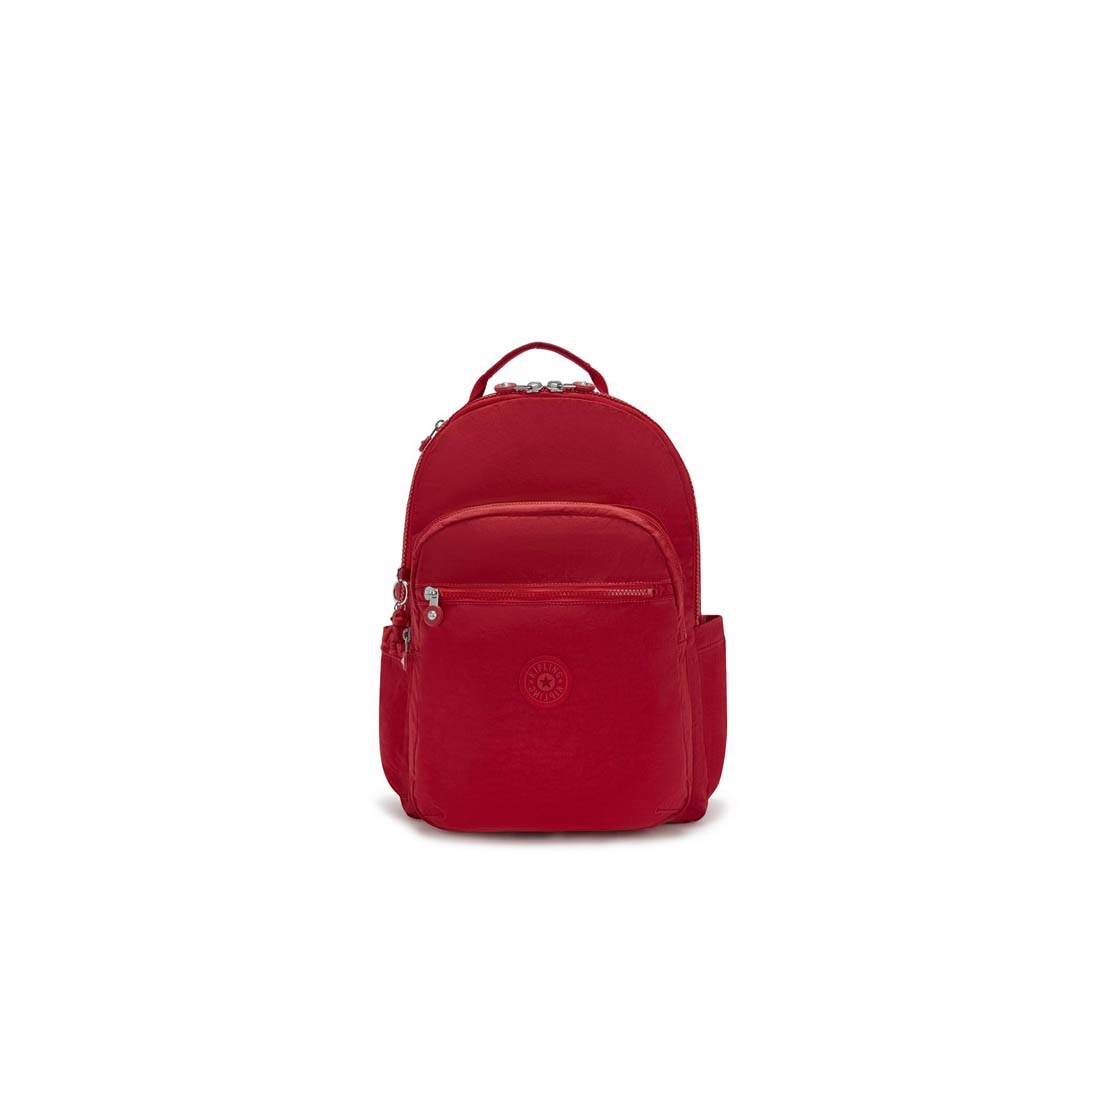 Buy Kipling SEOUL Red Rouge - Kipling, delivered to your home | The Outfit